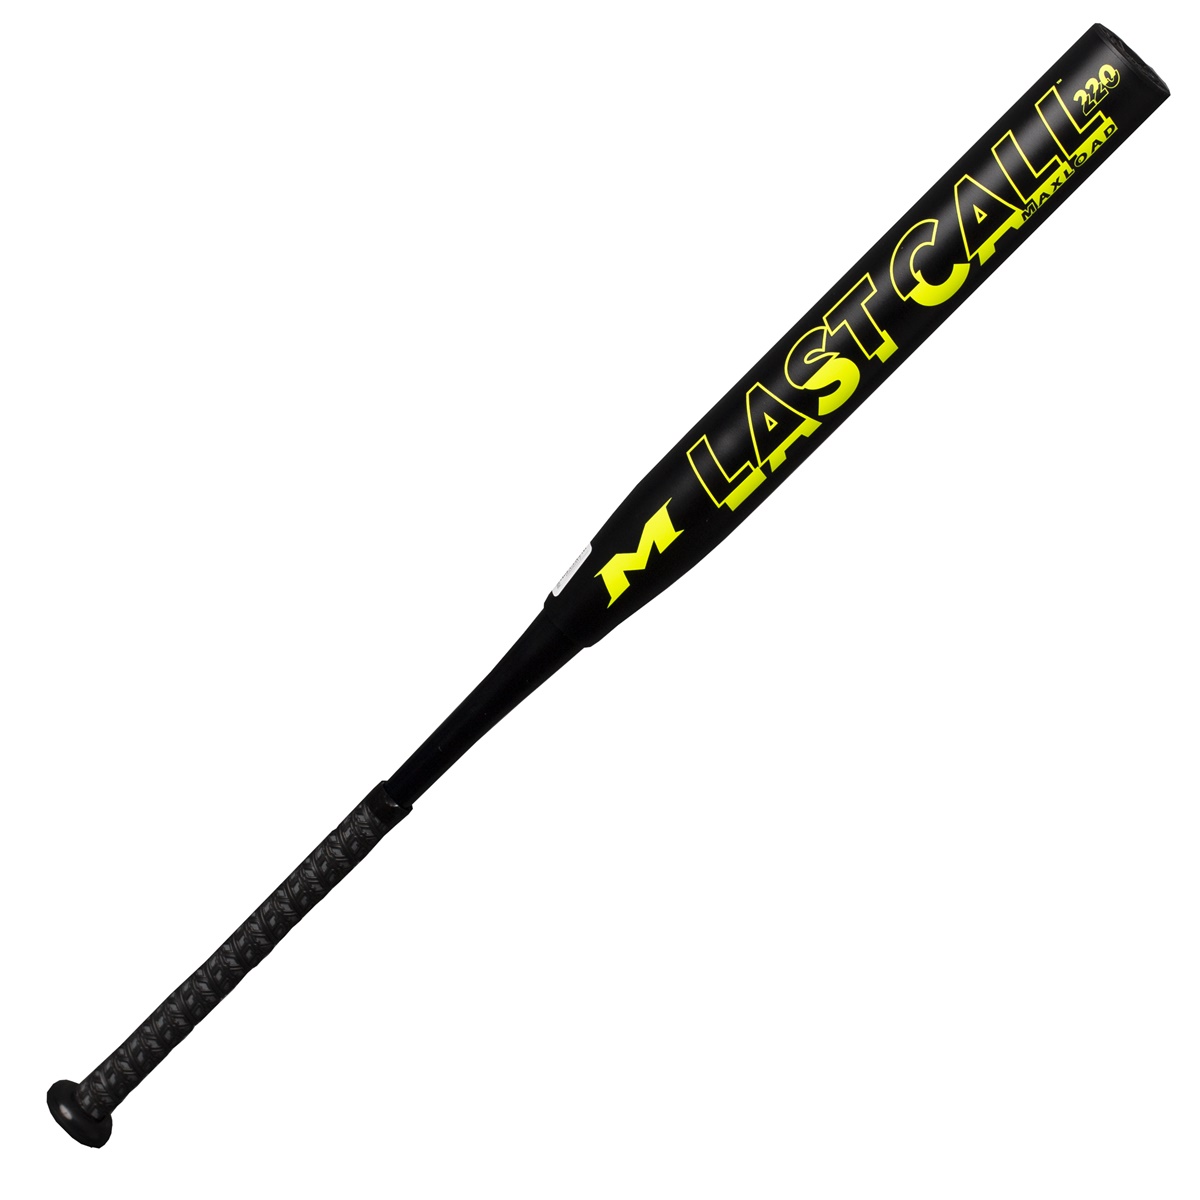 Don't miss out on the 2021 Last Call Maxload USSSA bat! USSSA will be implementing a new testing certification in 2021 meaning new bats will be certified at a different standard. These Last Call bats are the last to feature the old testing standard, and will be grandfathered in when the change is in place. These bats feature our Triple Matrix Core+ technology combined with 100 comp premium aerospace grade fiber which work together to maximize performance and durability. In addition, the F2P handle optimizes barrel flex which allows you to get the 14-inch, Maxload barrel through the zone faster. Don't miss out on these crazy hot bats, get your Last Call Maxload USSSA bat today!   Made in the U.S.A.  Size:   2 1/4 in  Frame:   Two-Piece  Technology:   Triple Matrix Core, 100 COMP  Series:   Last Call  Warranty:   1 Year  Barrel Length:   14 in  Year Released:   2021  TRIPLE MATRIX CORE + TECHNOLOGY INCREASES OUR EXCLUSIVE AEROSPACE GRADE MATERIAL VOLUME BY 15%, ELIMINATING WALL SEAMS WITH A BREAKTHROUGH CARBONIZED PROCESS THAT MAXIMIZES BOTH PERFORMANCE AND DURABILITY. FLEX 2 POWER (F2P) OPTIMIZES HANDLE FLEX TO BARREL LOADING WHICH MAXIMIZES THE OVERALL SPEED OF THE BAT HEAD THROUGH THE HITTING ZONE. 100 COMP™IS THE REVOLUTIONARY FORMULA THAT CHANGED THE GAME AND INTRODUCED CERTIFIED MIKEN® HIGH PERFORMANCE EQUIPMENT. THIS PRODUCT IS ENGINEERED UTILIZING 100% PREMIUM AEROSPACE GRADE FIBER TO DELIVER MIKEN'S LEGENDARY PERFORMANCE AND DURABILITY.